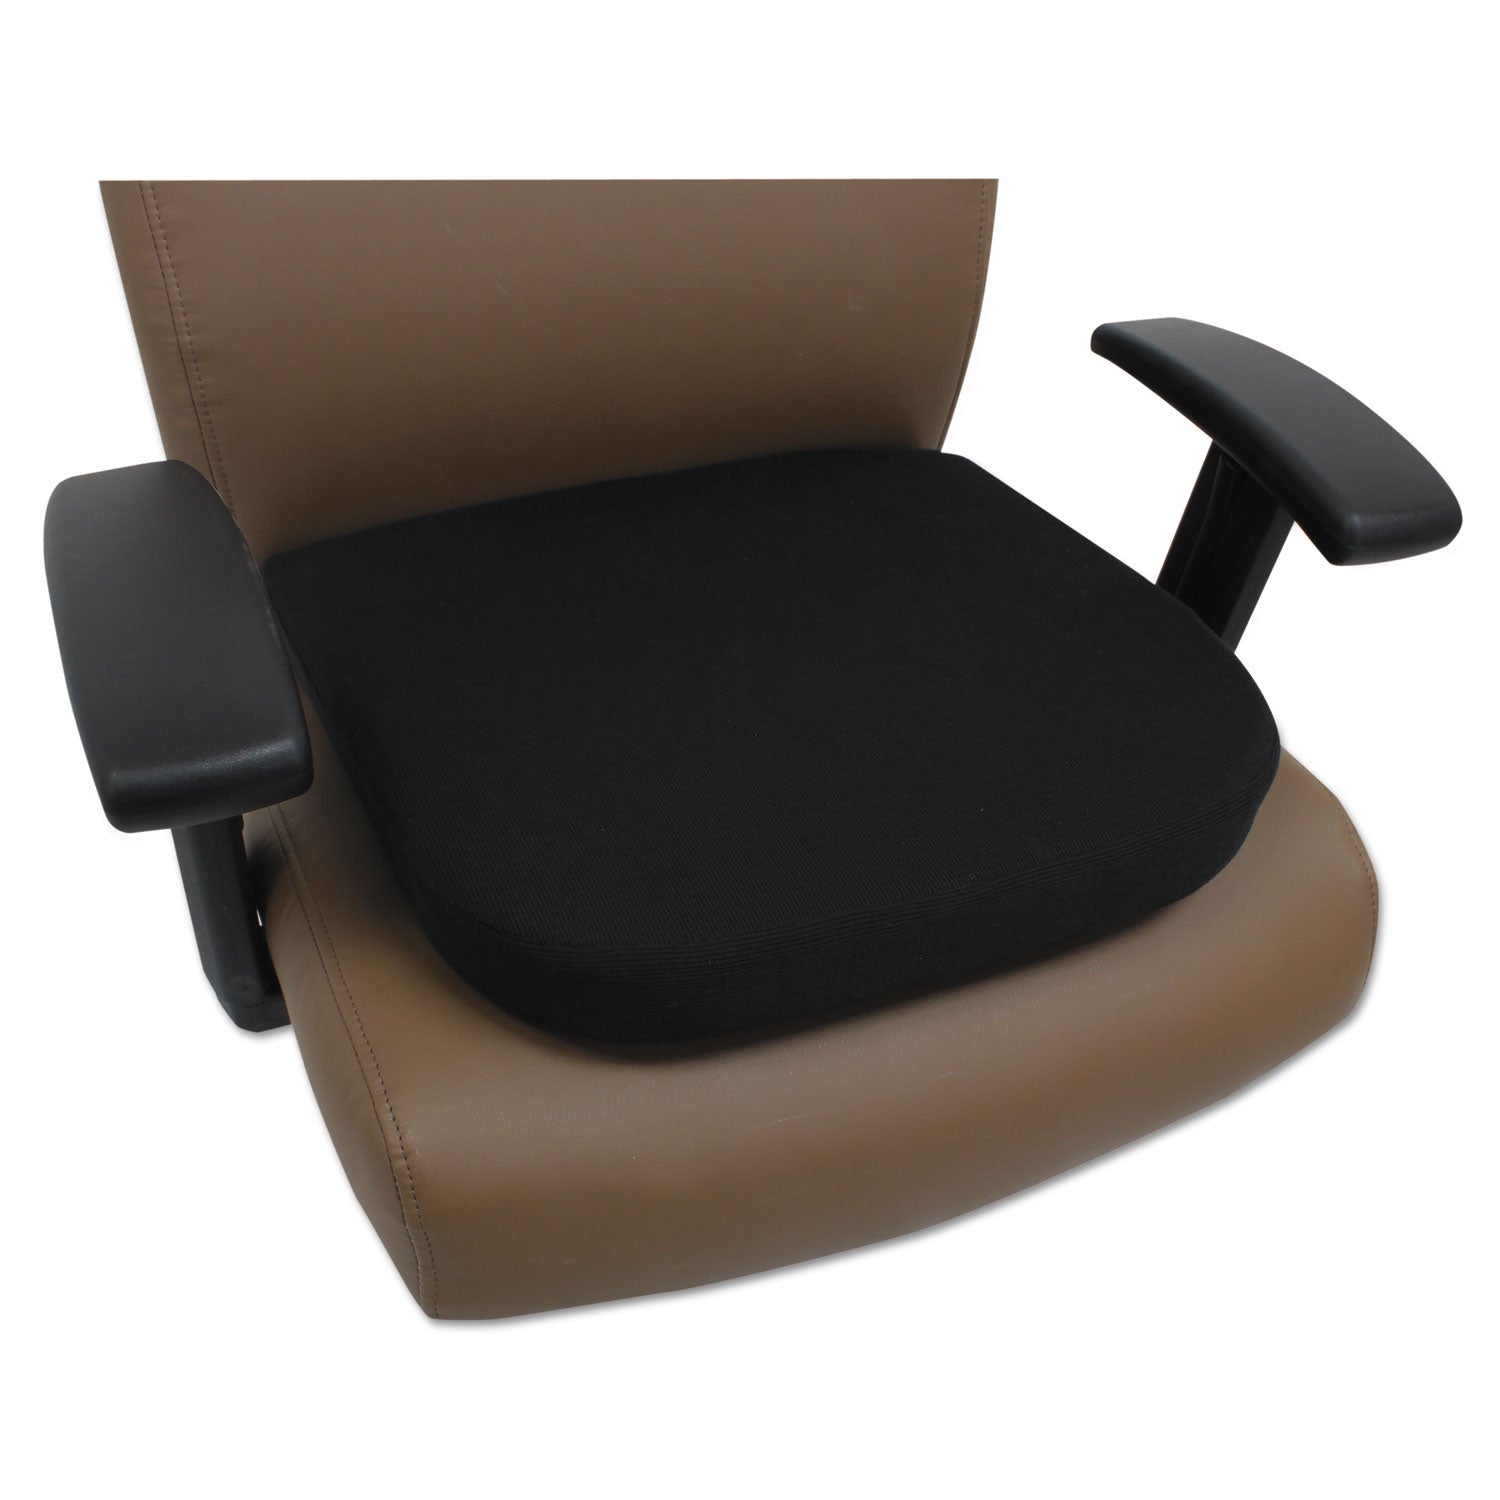 cooling-gel-memory-foam-seat-cushion-fabric-cover-with-non-slip-under-cushion-surface-165-x-1575-x-275-black_alecgc511 - 1